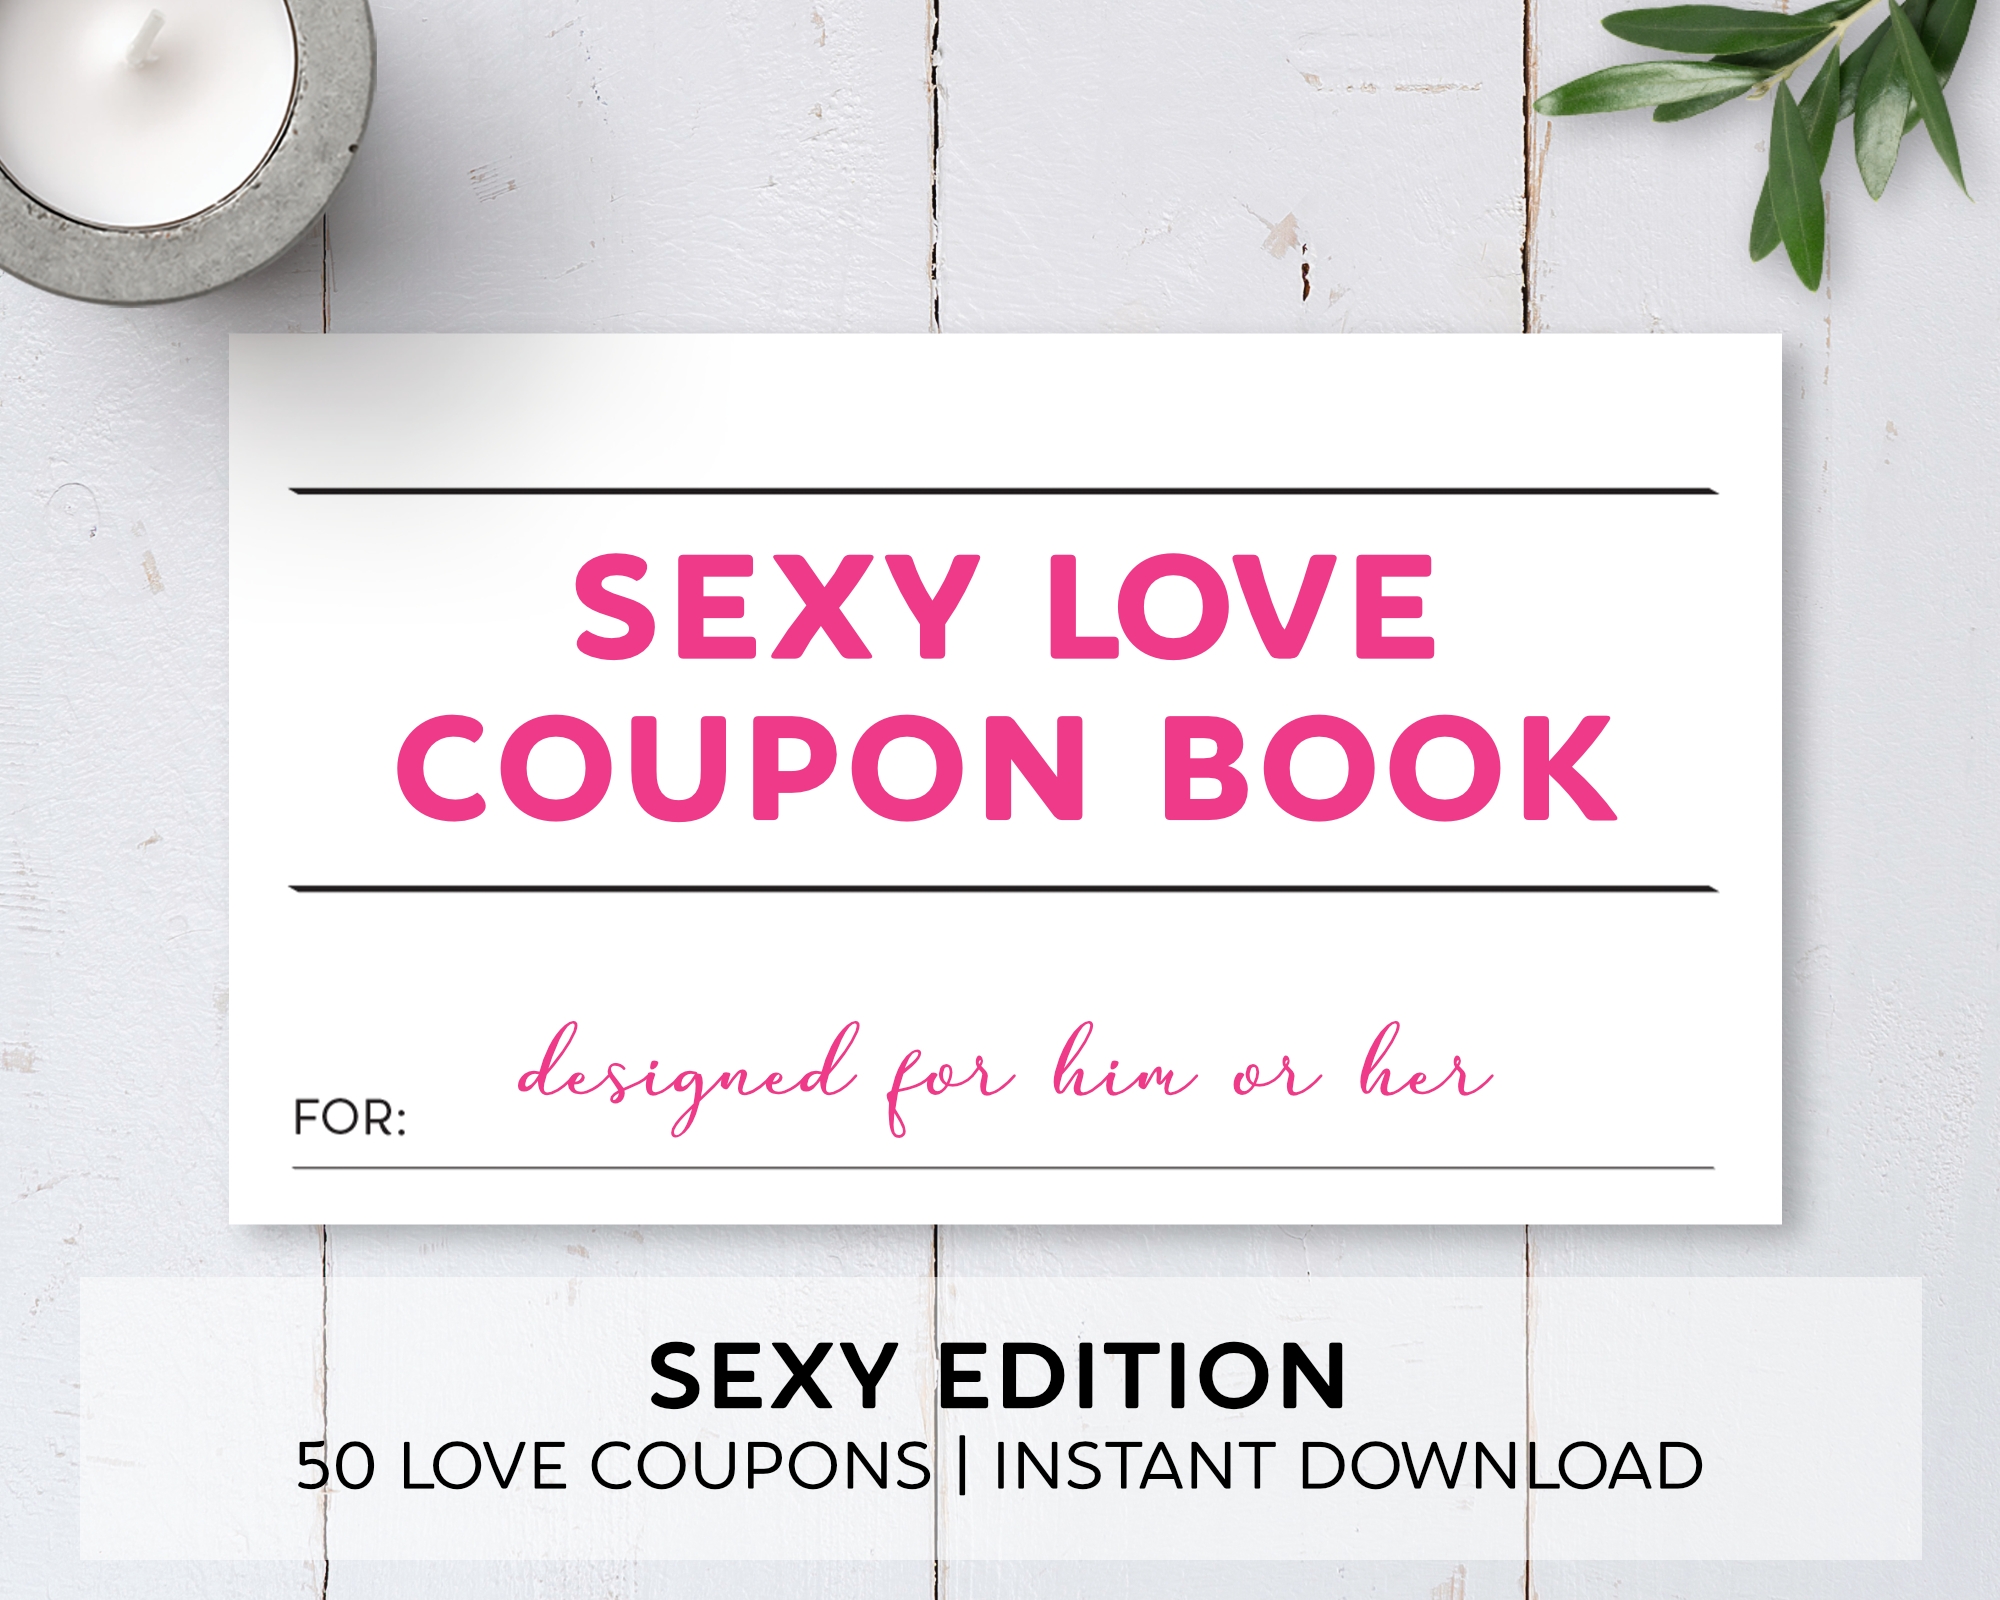 Sexy Edition Love Coupon Book / Printable / Instant Download Kinky Ink Press